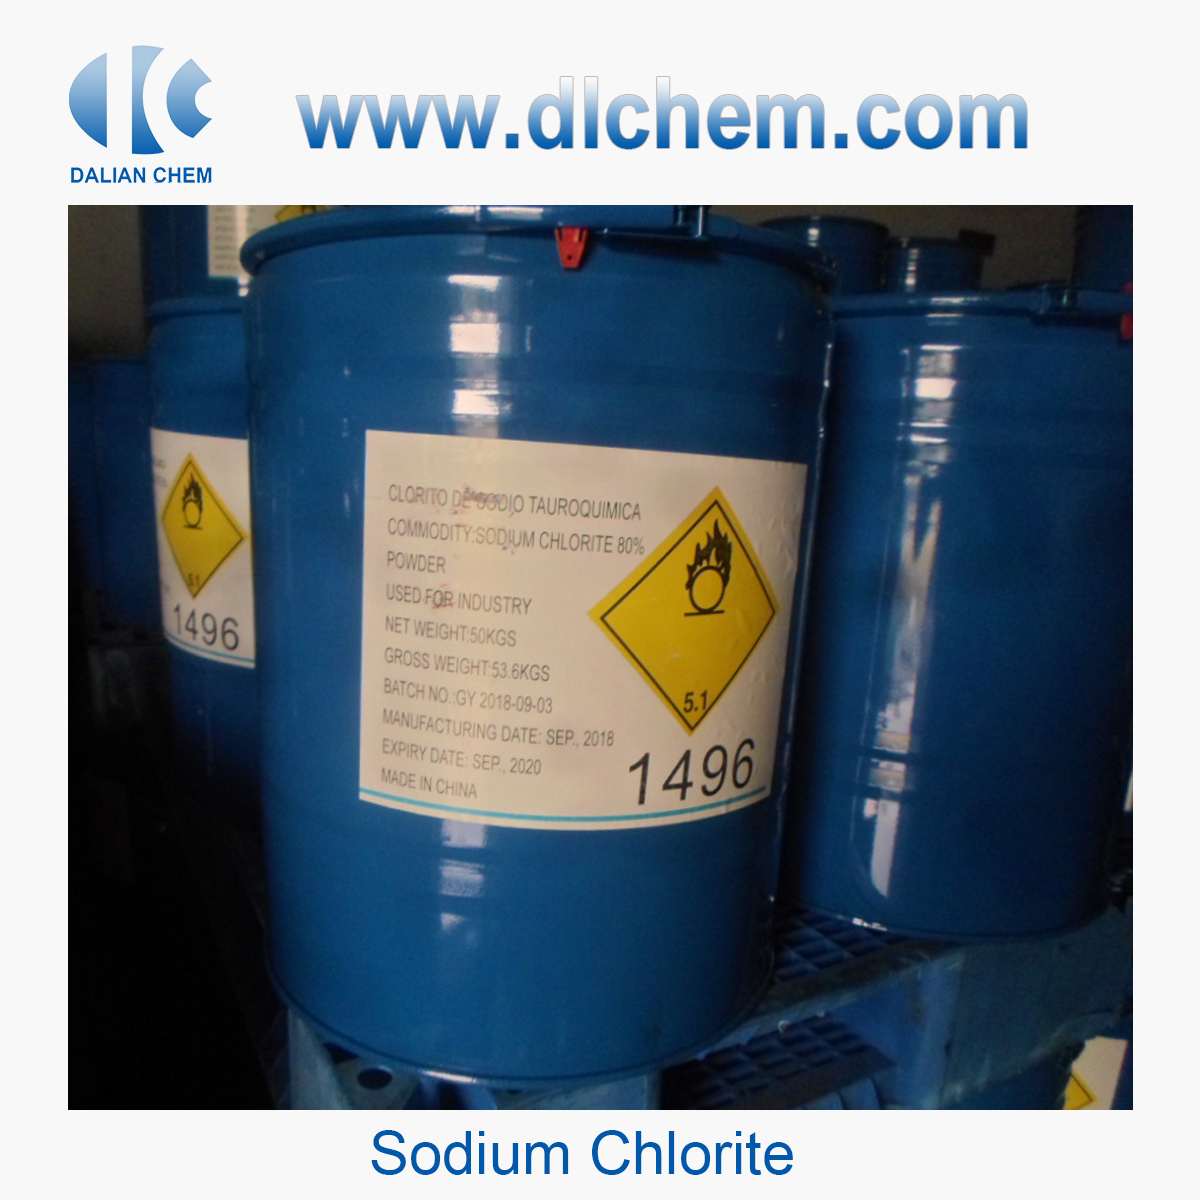 Hot Sale Sodium Chlorite for Bleach and Oxidizing Fungicide